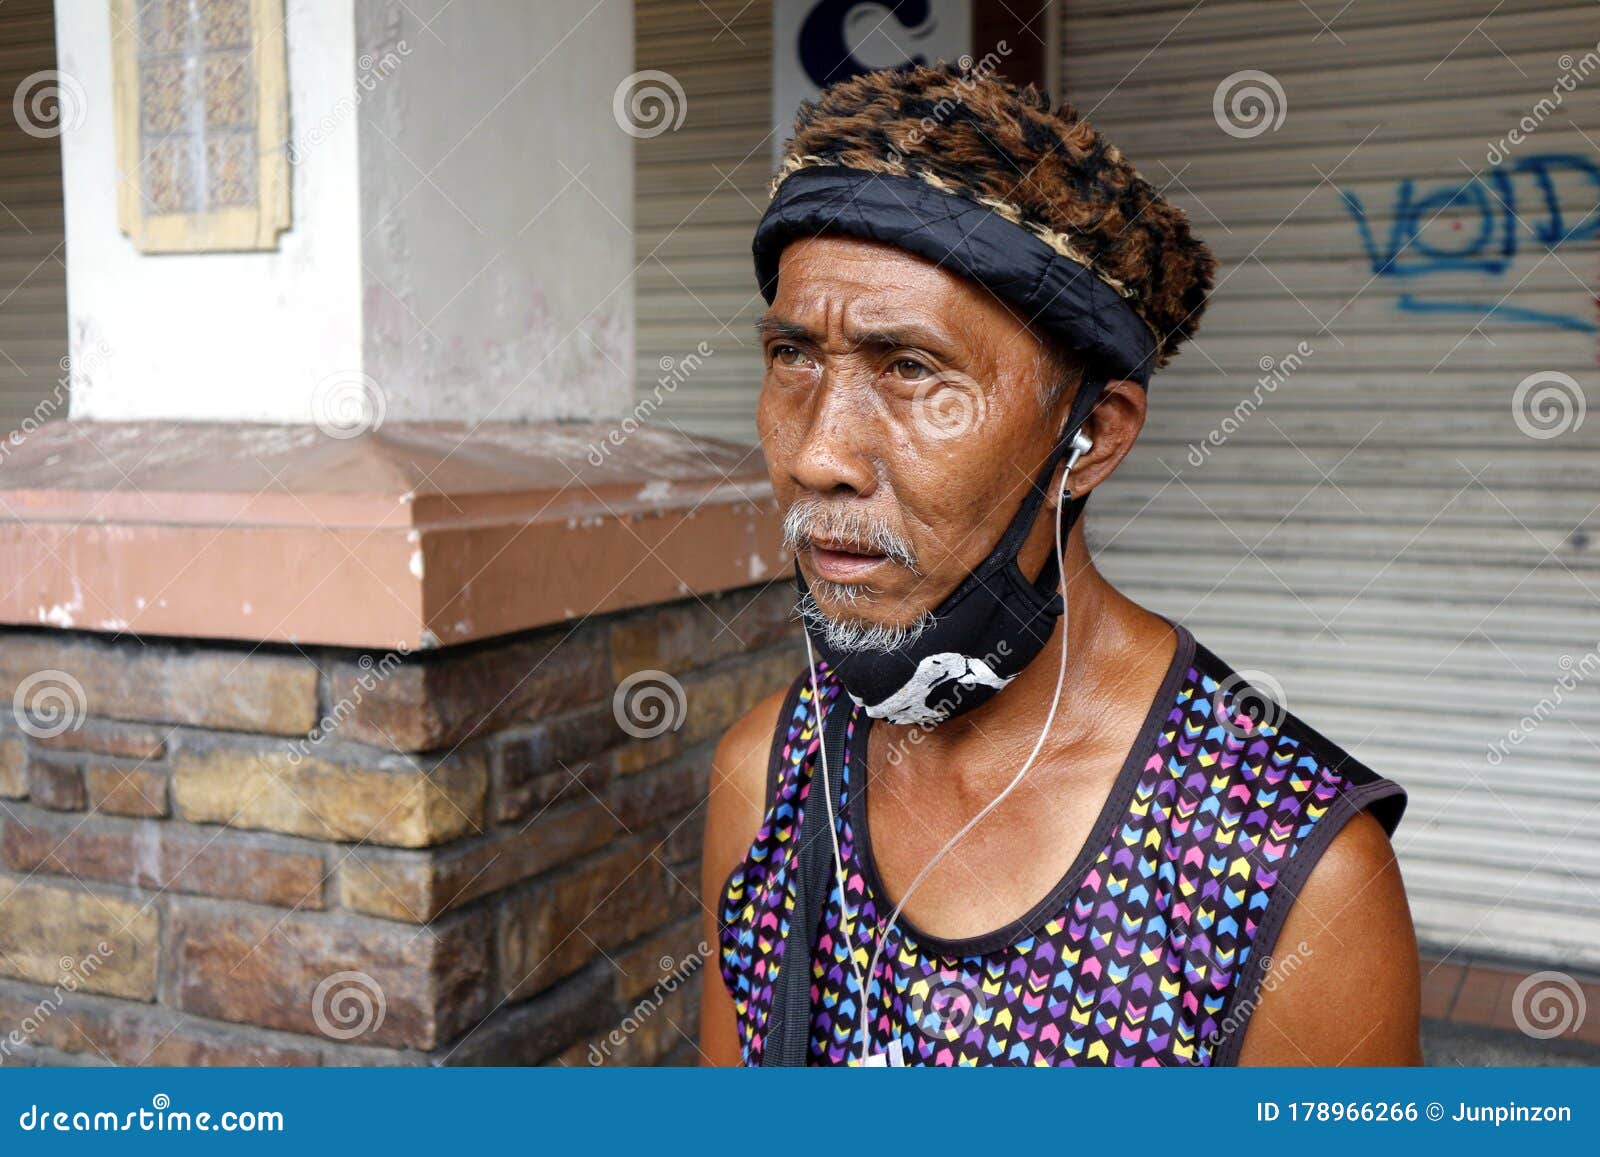 Portrait Of An Old Filipino Man Editorial Photo Image Of Person Beard 178966266